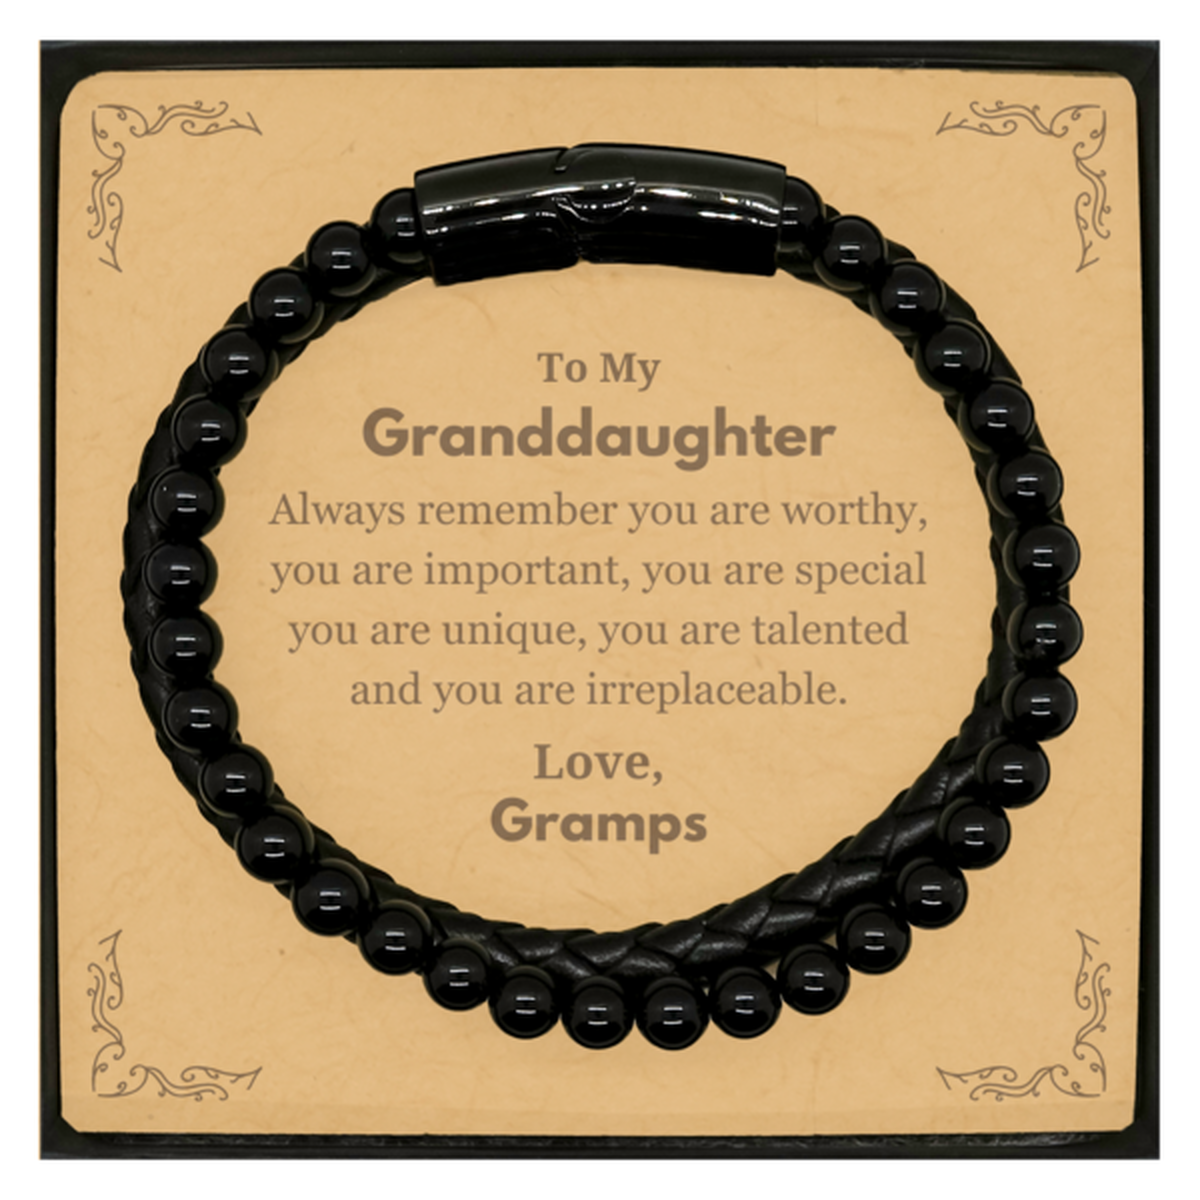 Granddaughter Birthday Gifts from Gramps, Inspirational Stone Leather Bracelets for Granddaughter Christmas Graduation Gifts for Granddaughter Always remember you are worthy, you are important. Love, Gramps